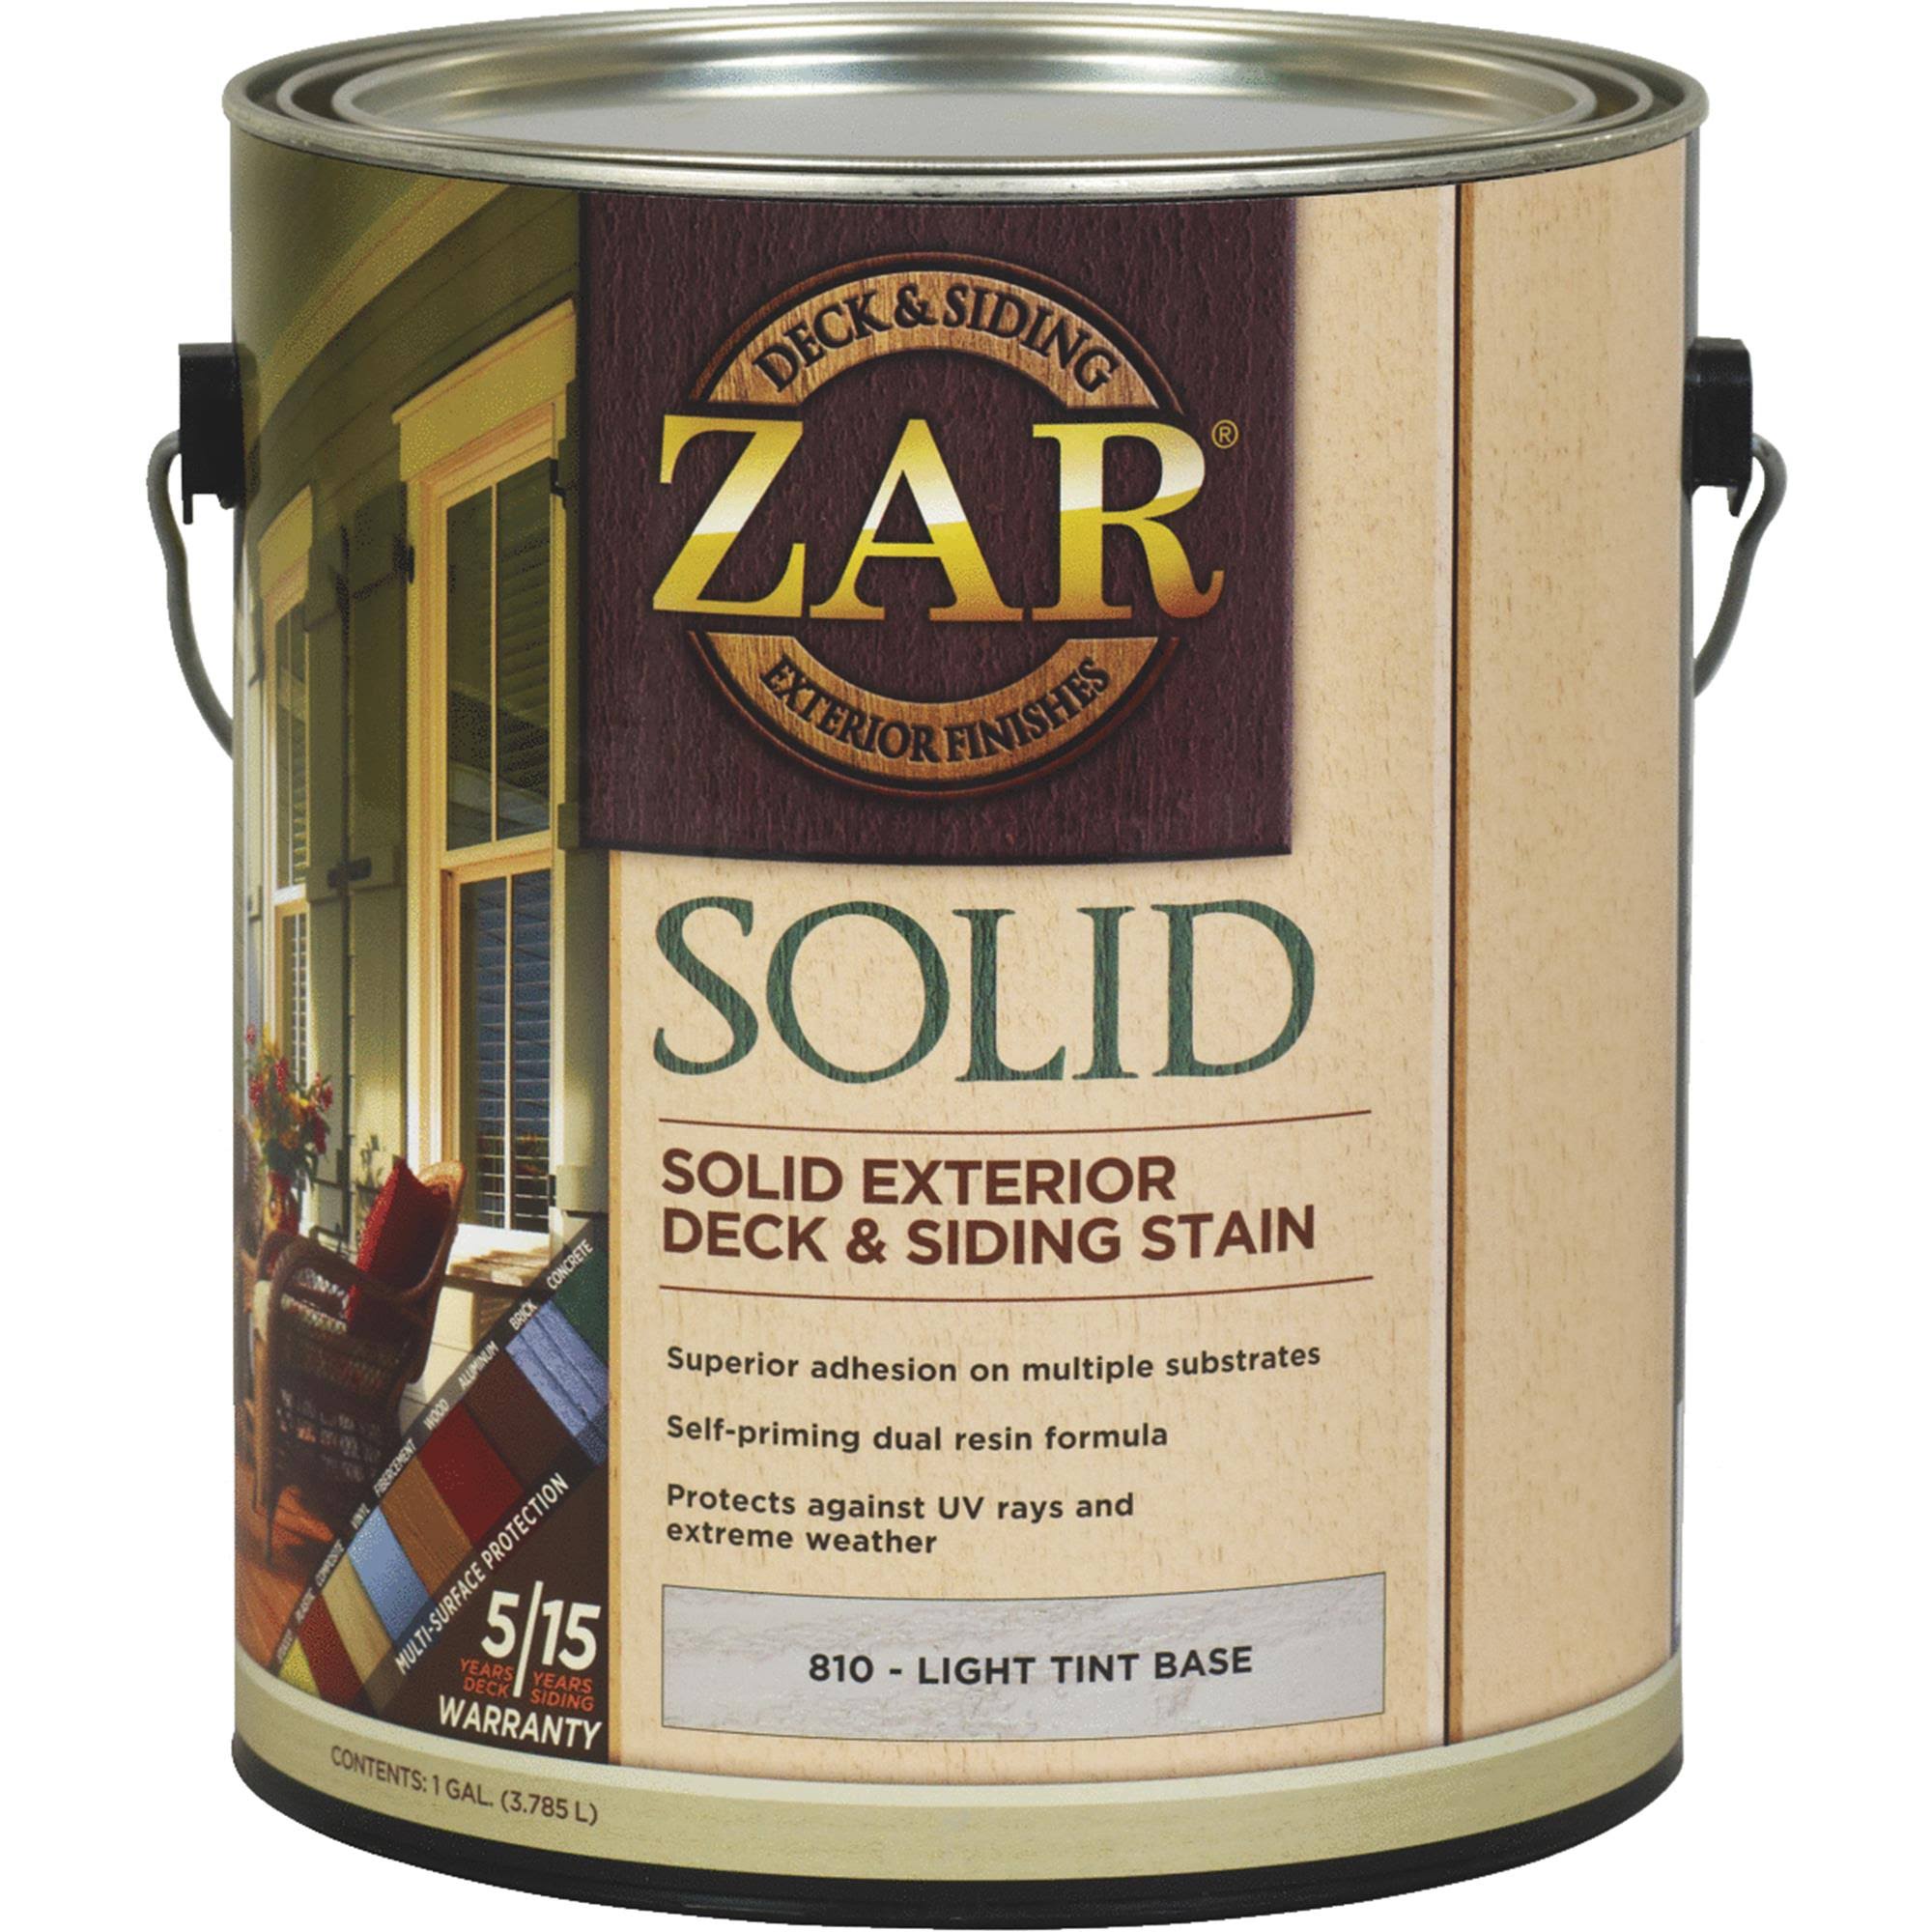 Zar Solid Exterior Deck & Siding Stain